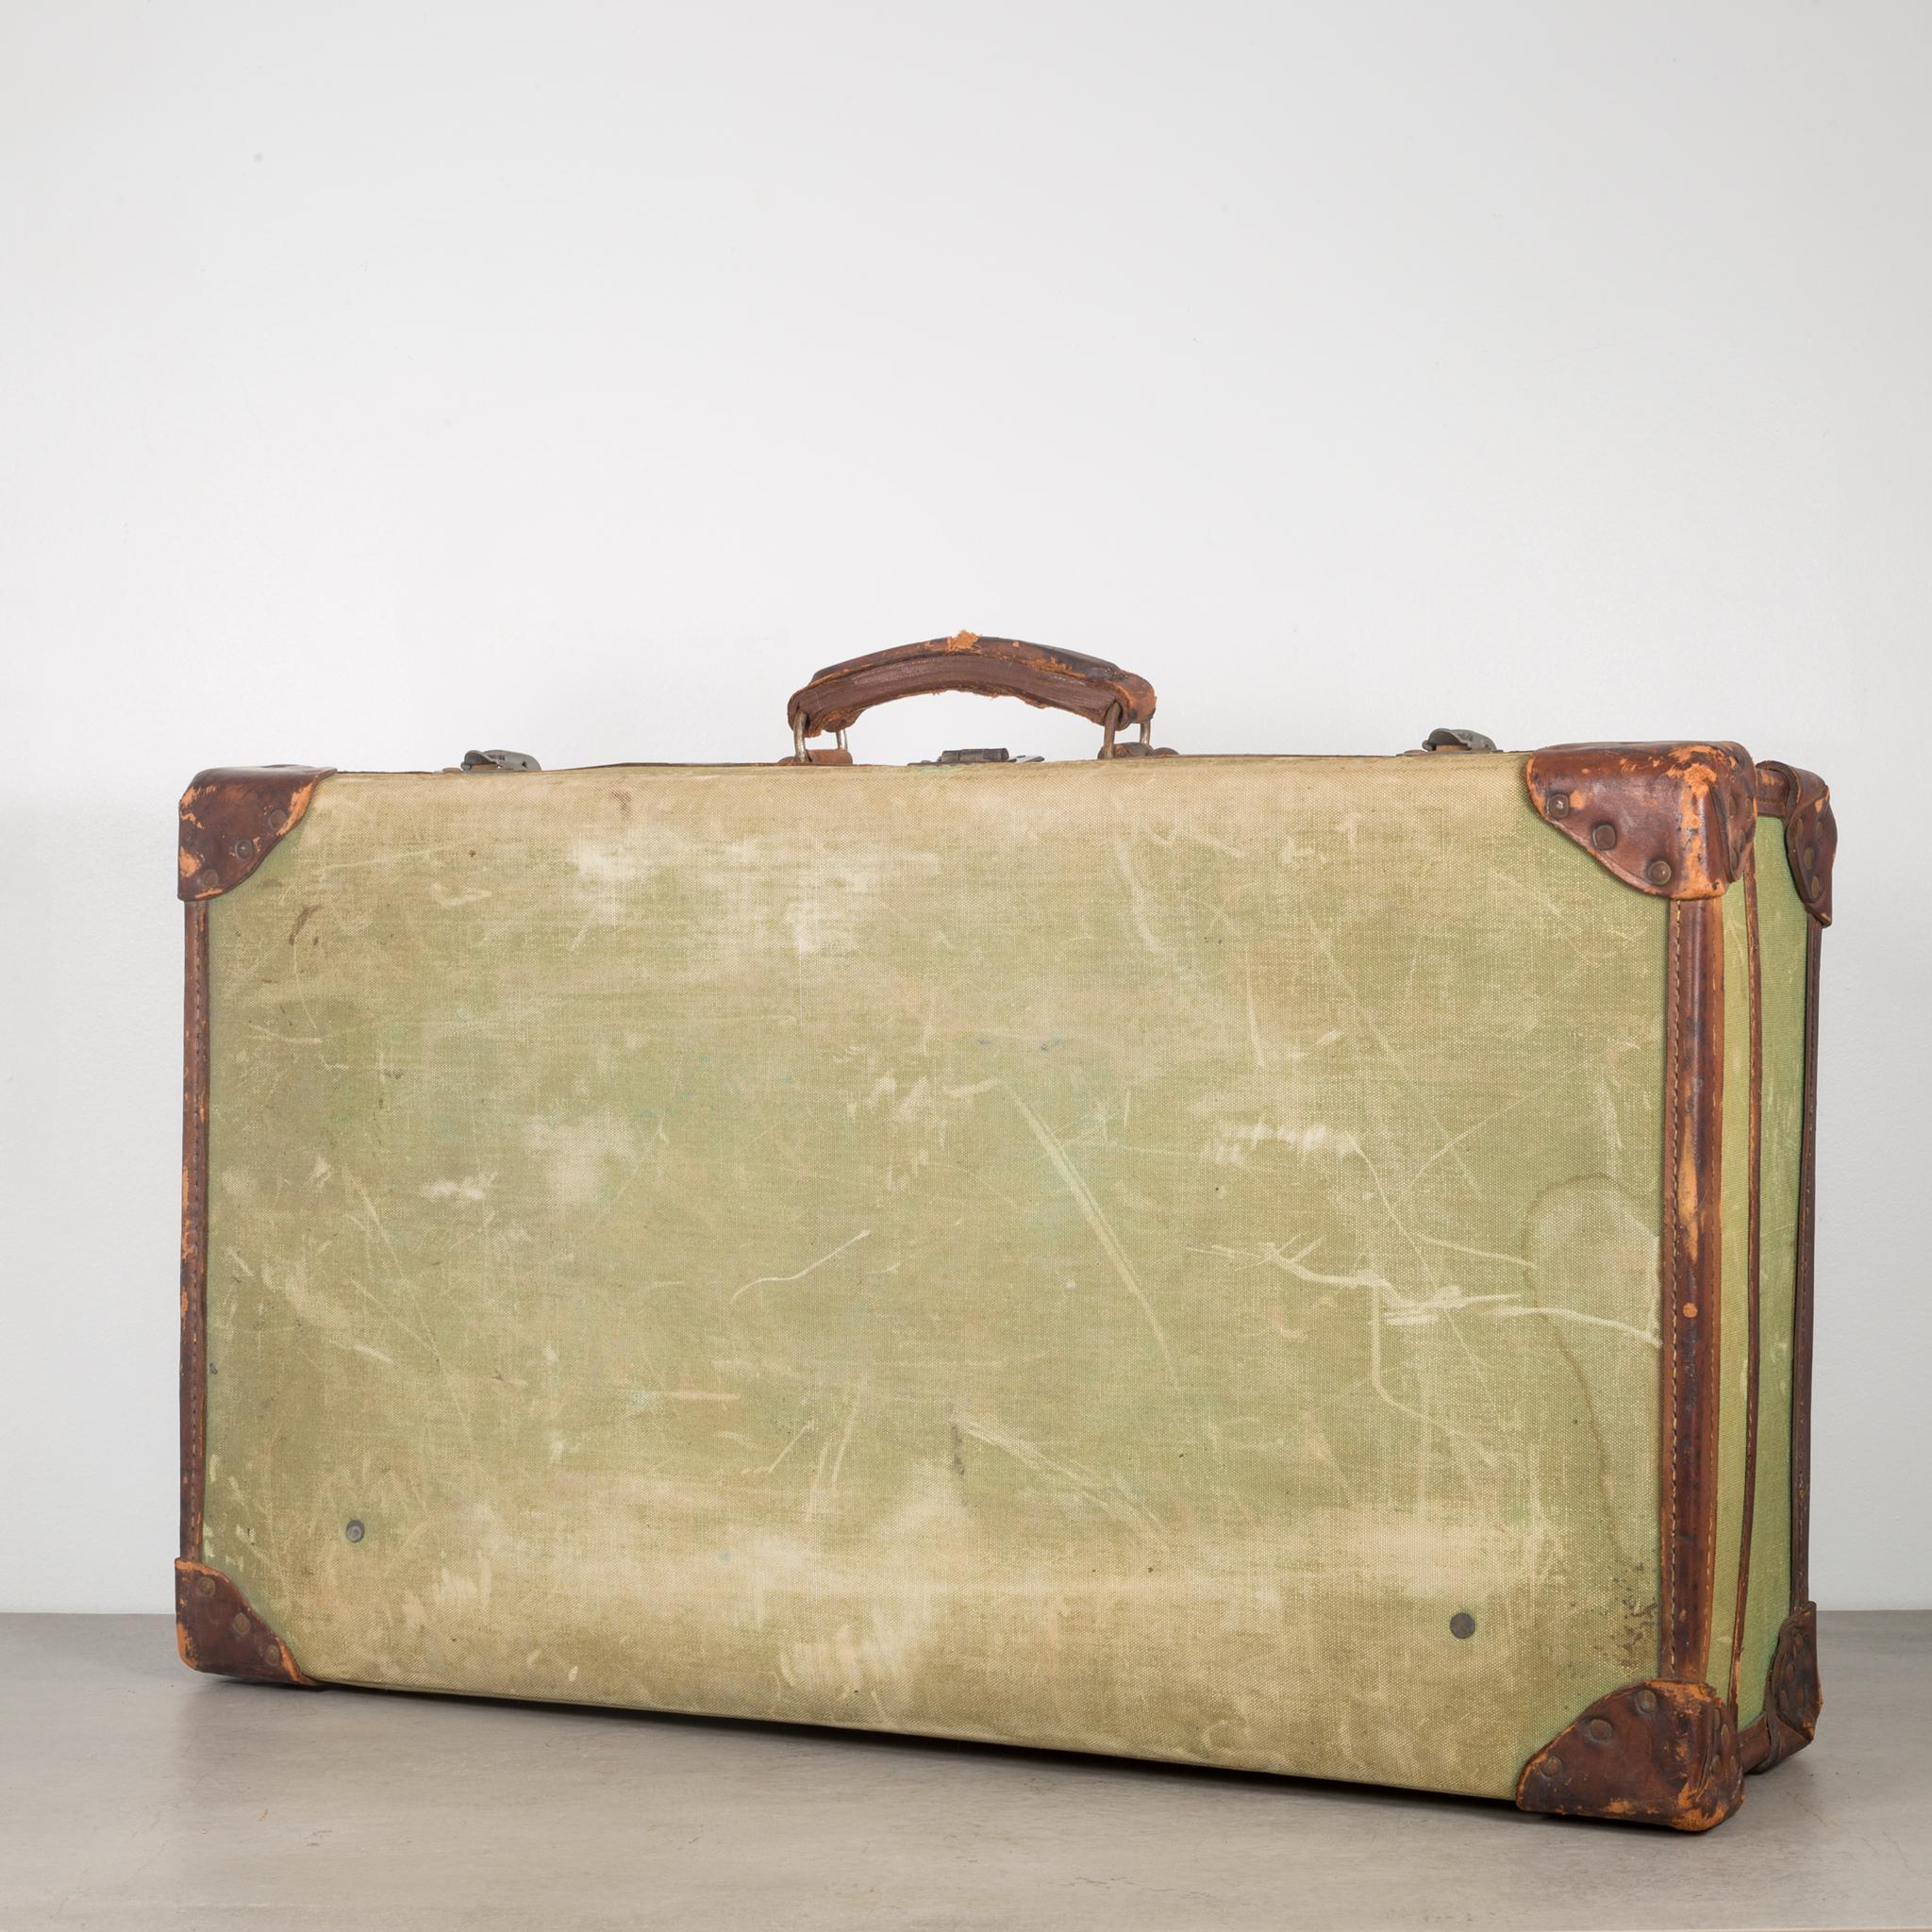 About

This is an original English canvas and leather suitcase stamped 